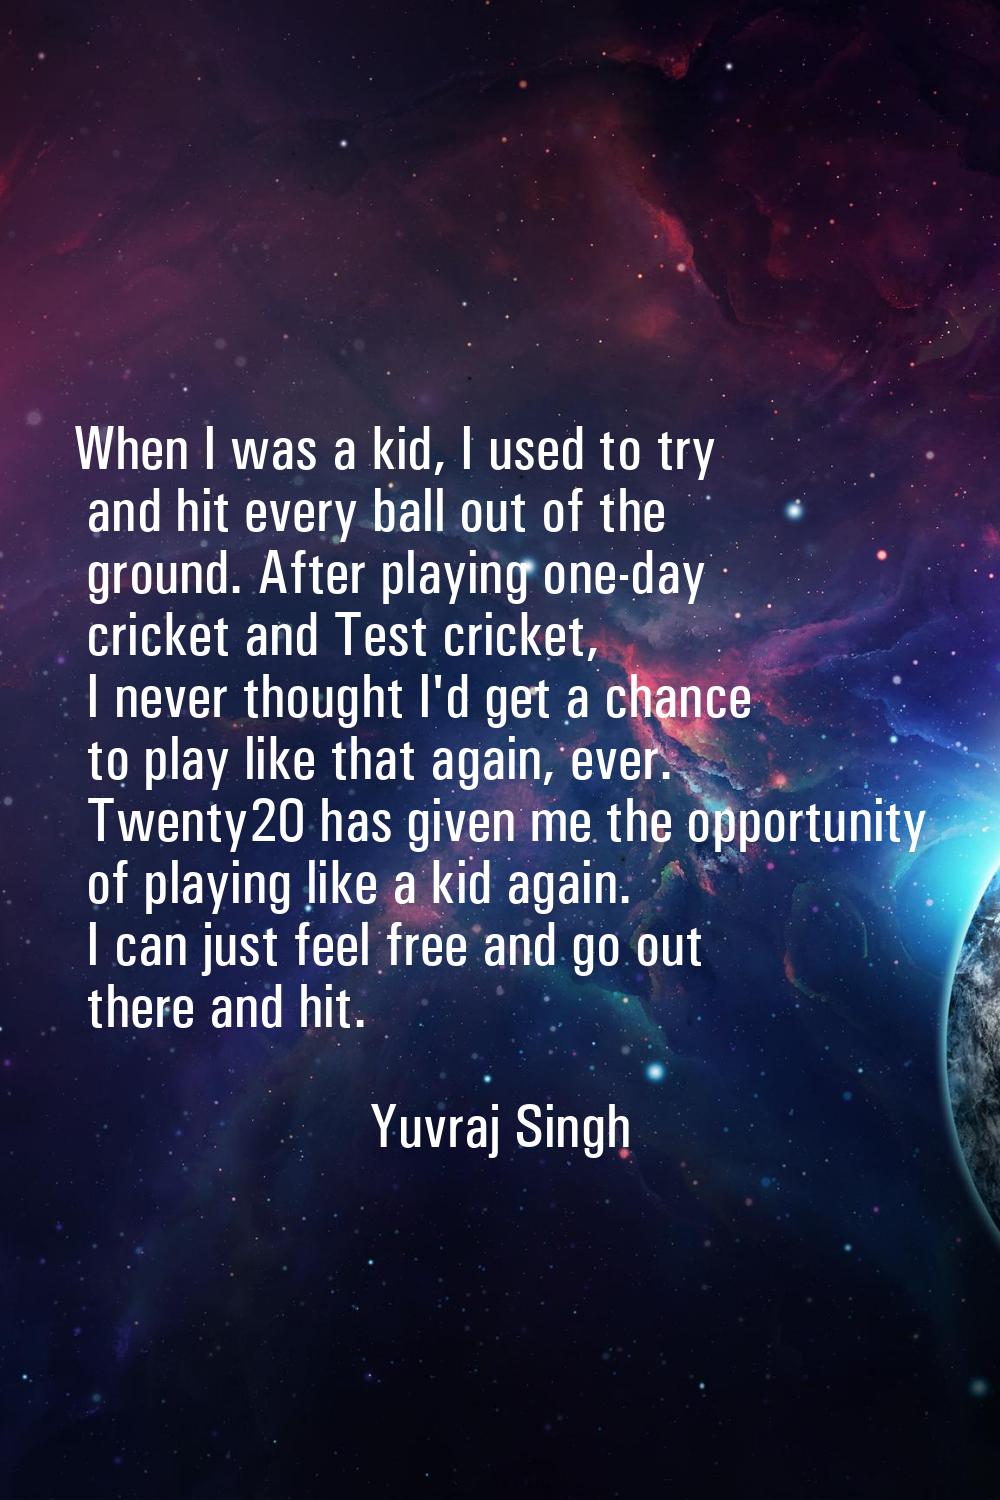 When I was a kid, I used to try and hit every ball out of the ground. After playing one-day cricket